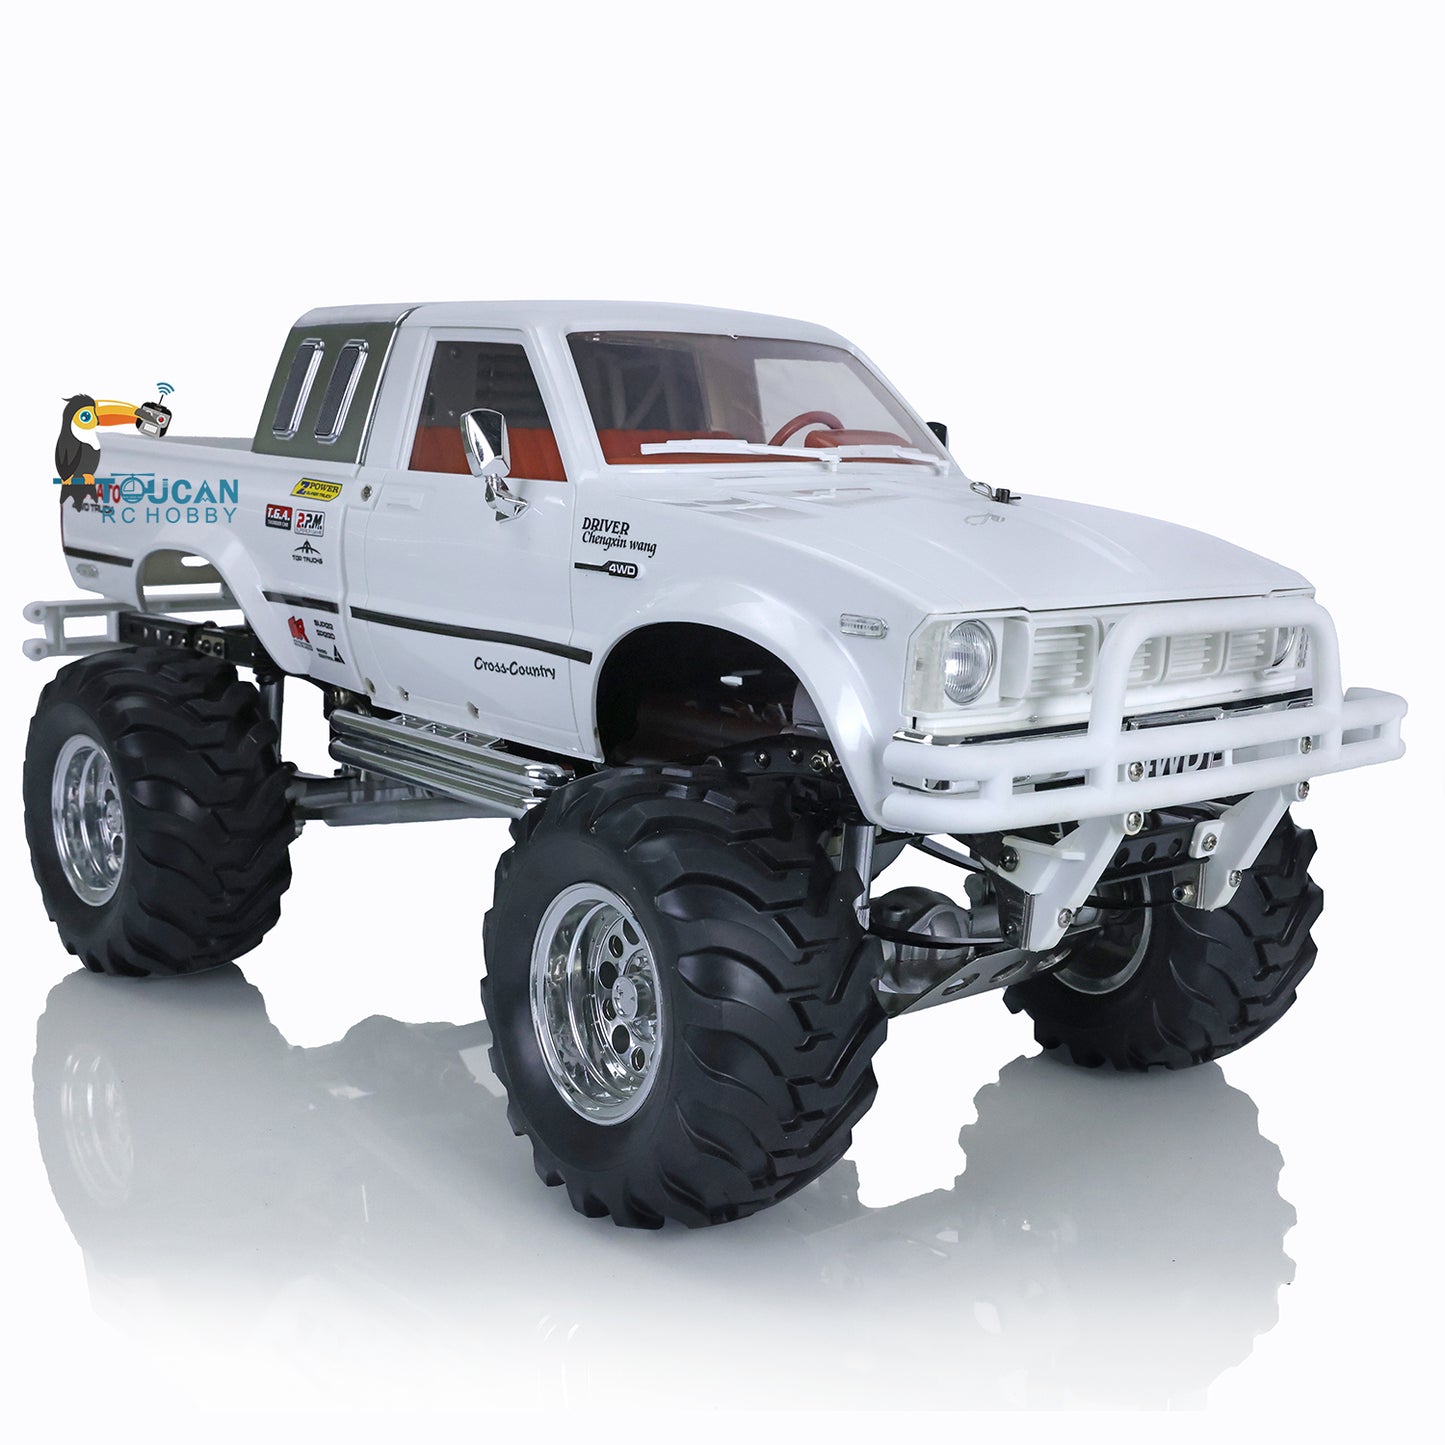 IN STOCK HG 1/10 RC Pickup P407 4*4 Rally Car 2.4G RTR Off-Road Vehicles for Tamiiya Monster Truck Model Radio System Motor Battery